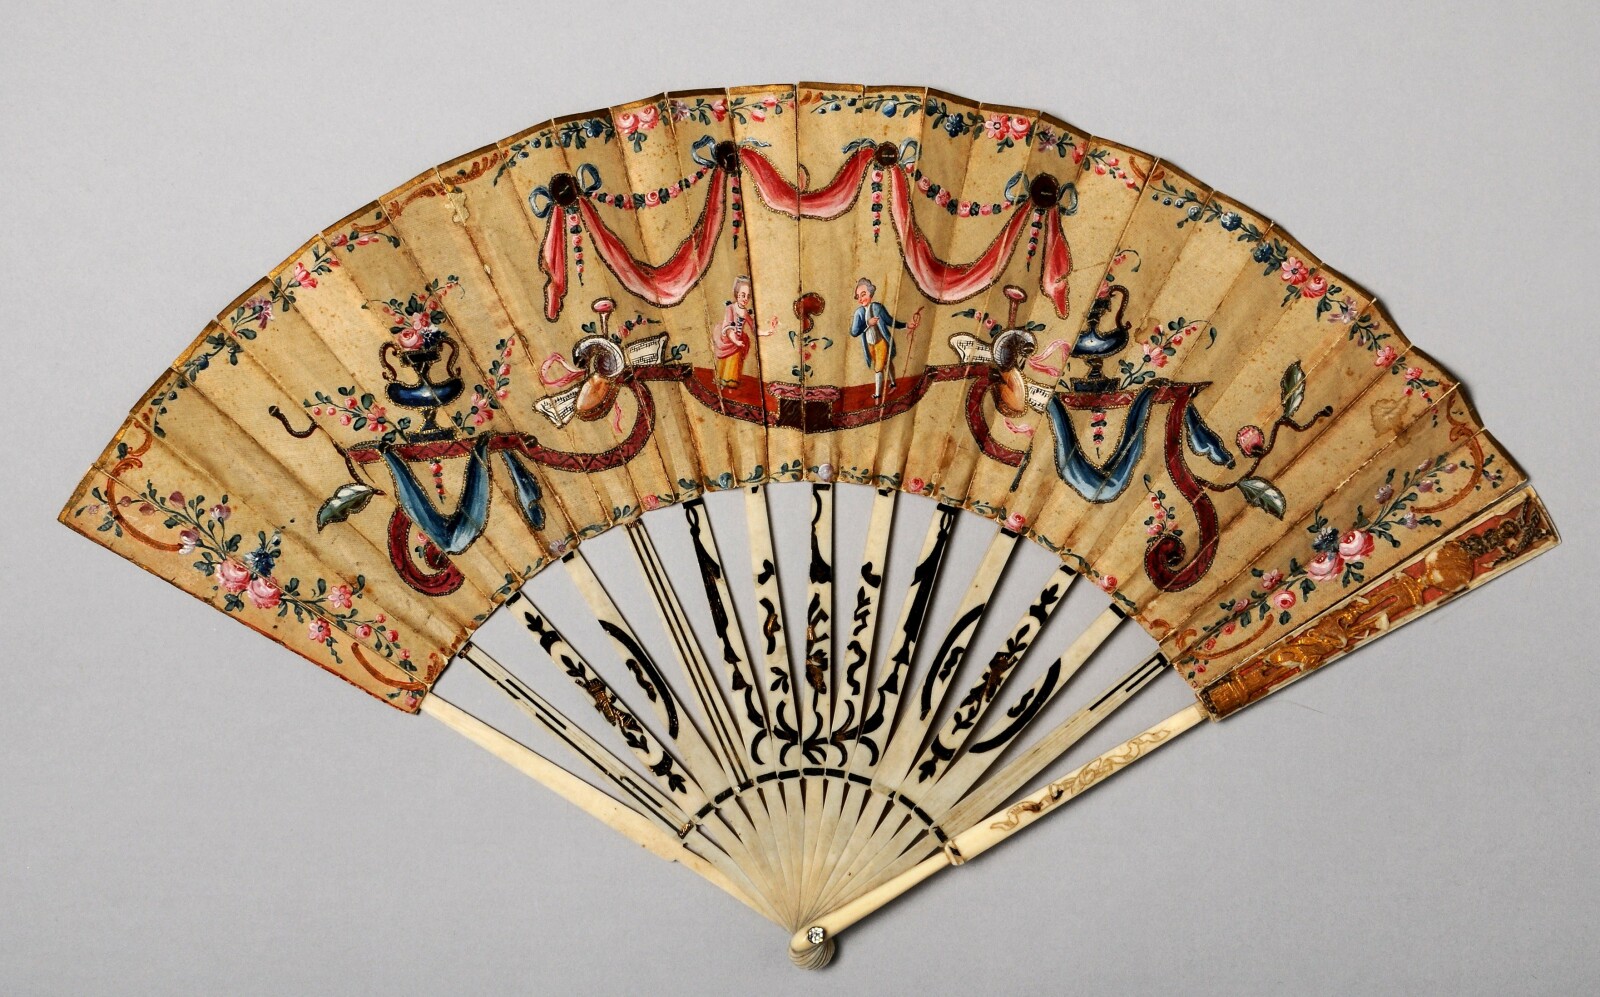 Fan with colourful painted images of men and women, flowers, swags and sequins.